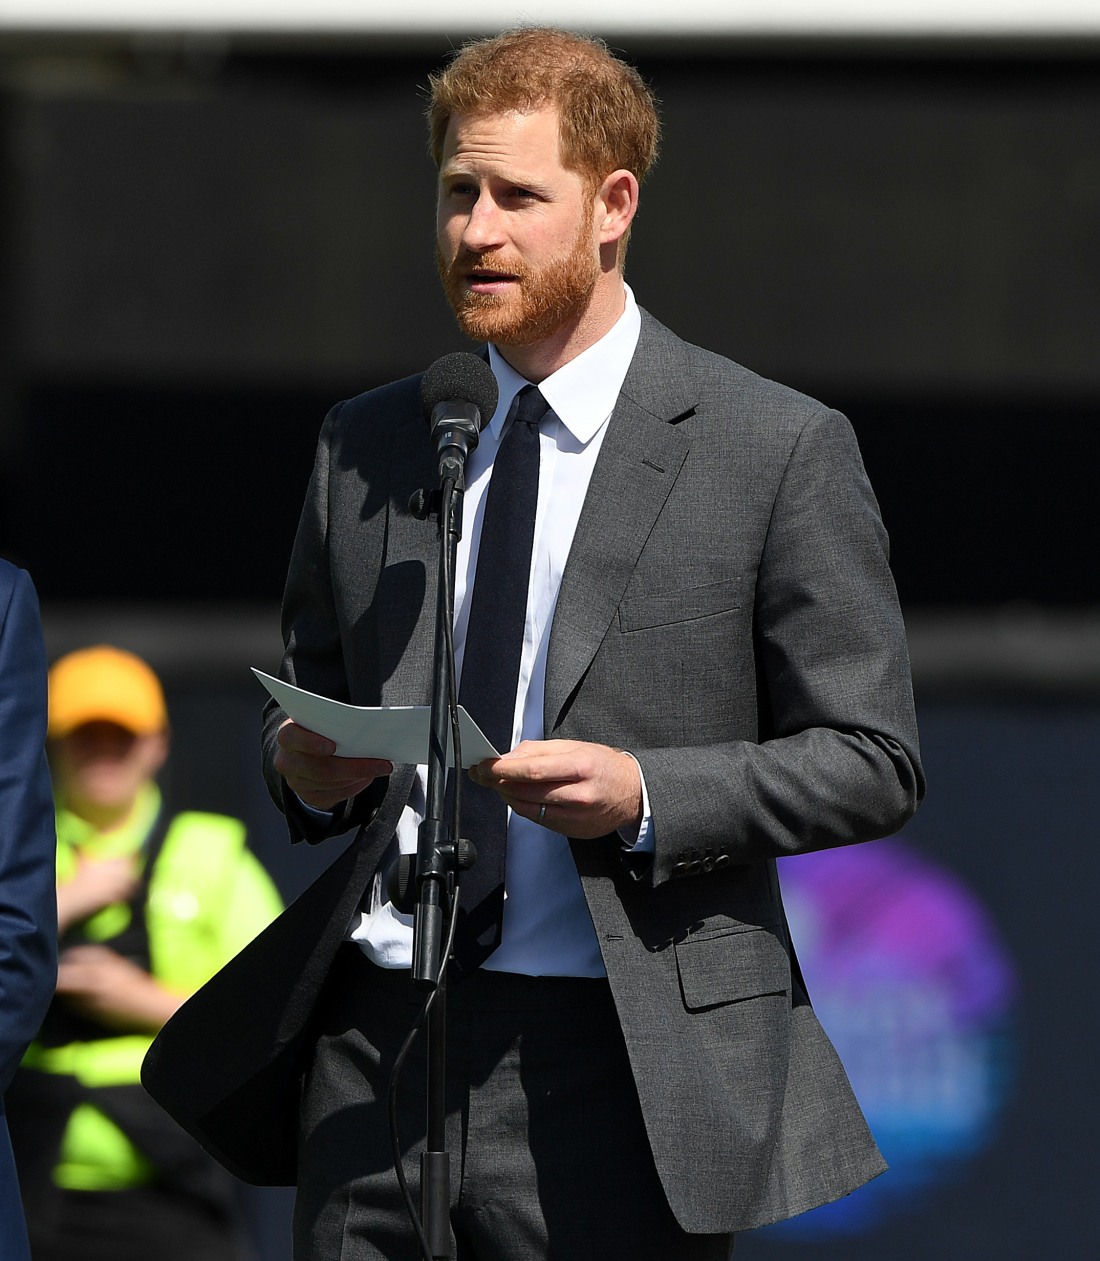 The Duke Of Sussex Attends The Opening Match Of The ICC Cricket World Cup